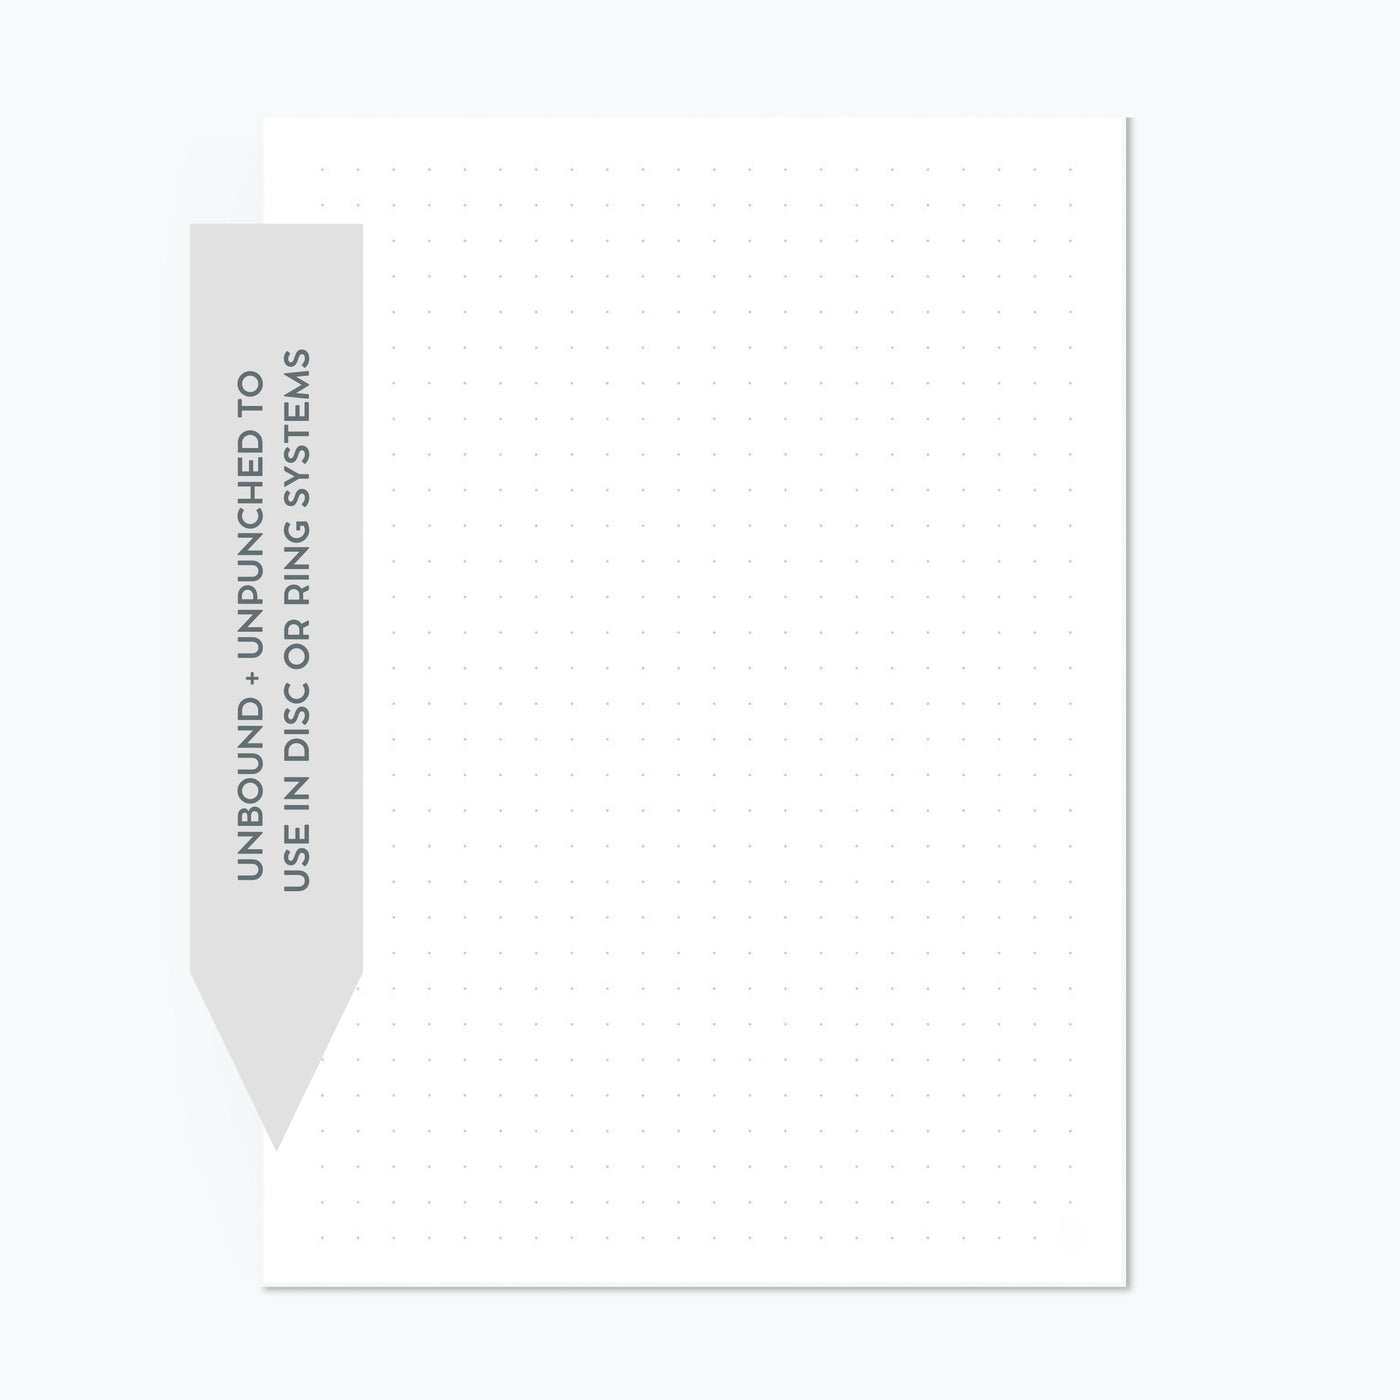 Dot Grid/Lined Standard Wide Inserts – Layle By Mail